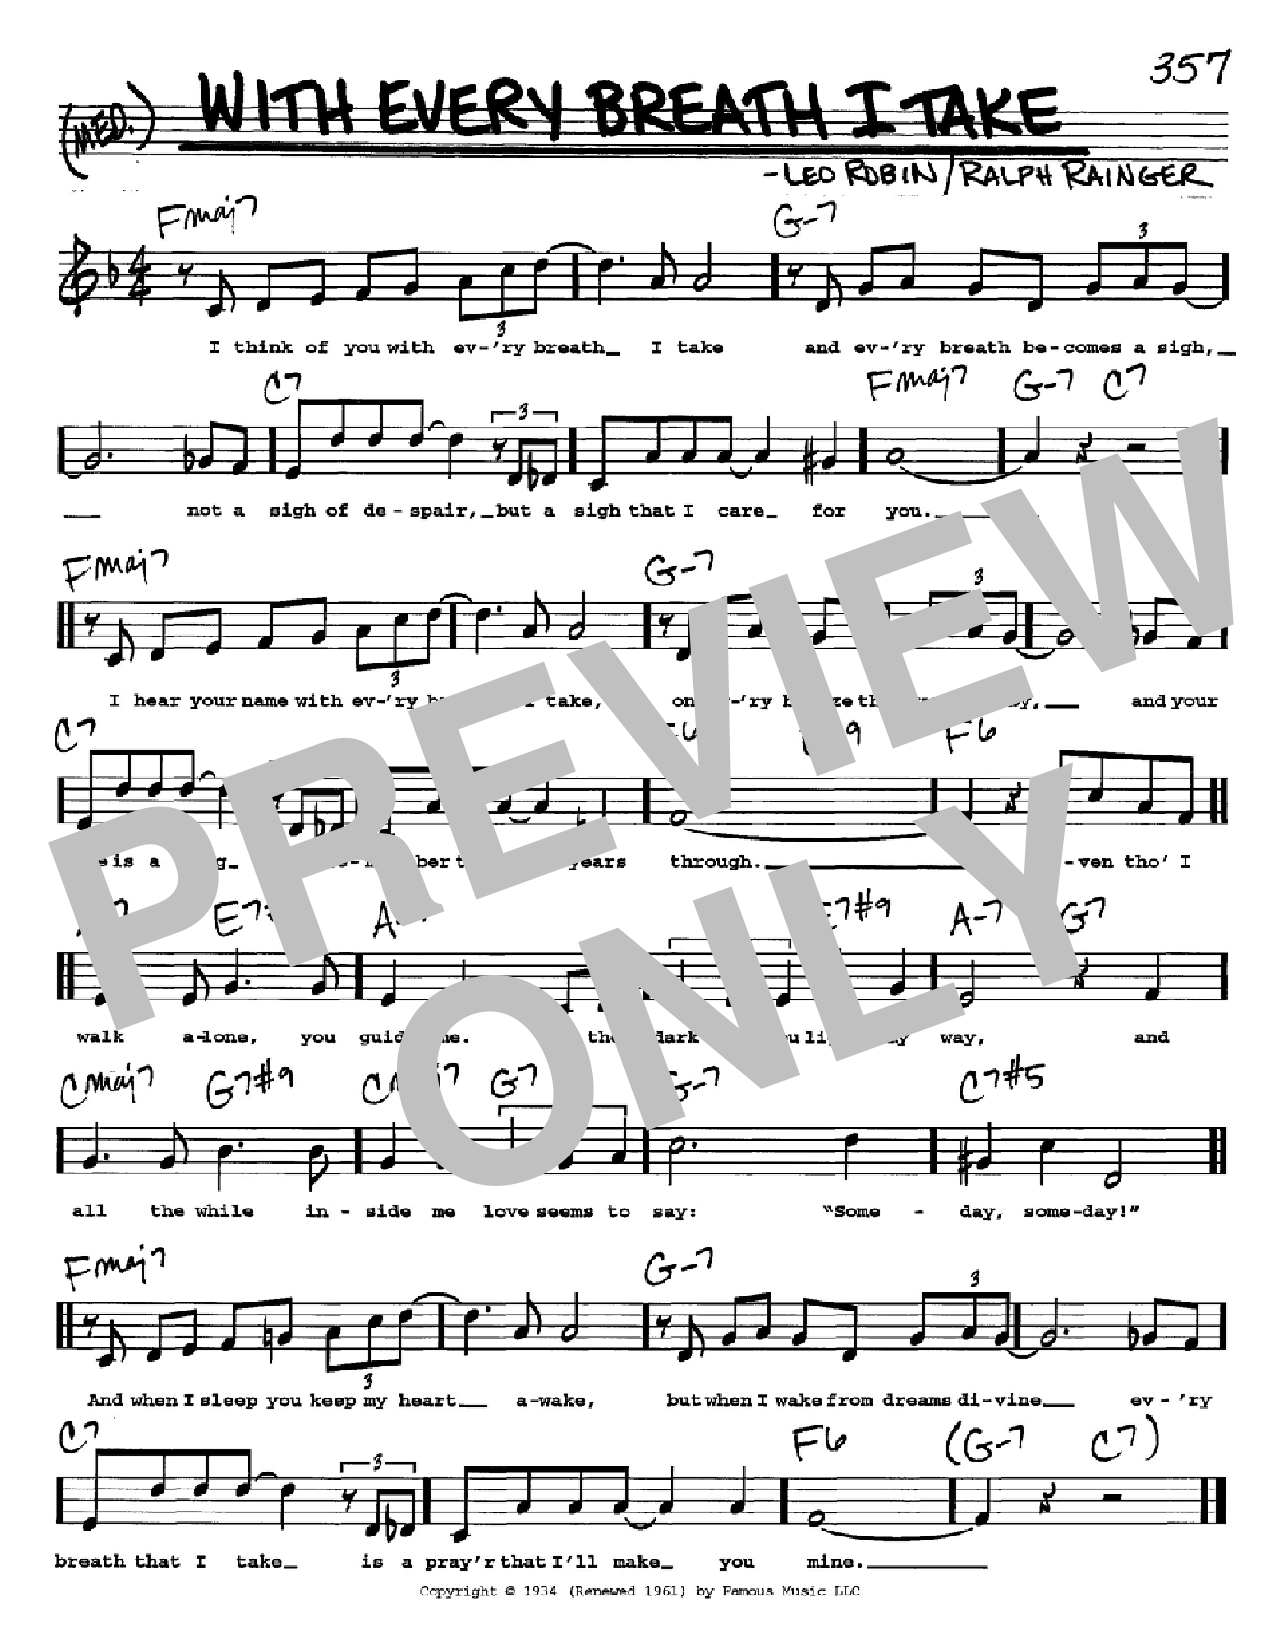 Download Leo Robin With Every Breath I Take Sheet Music